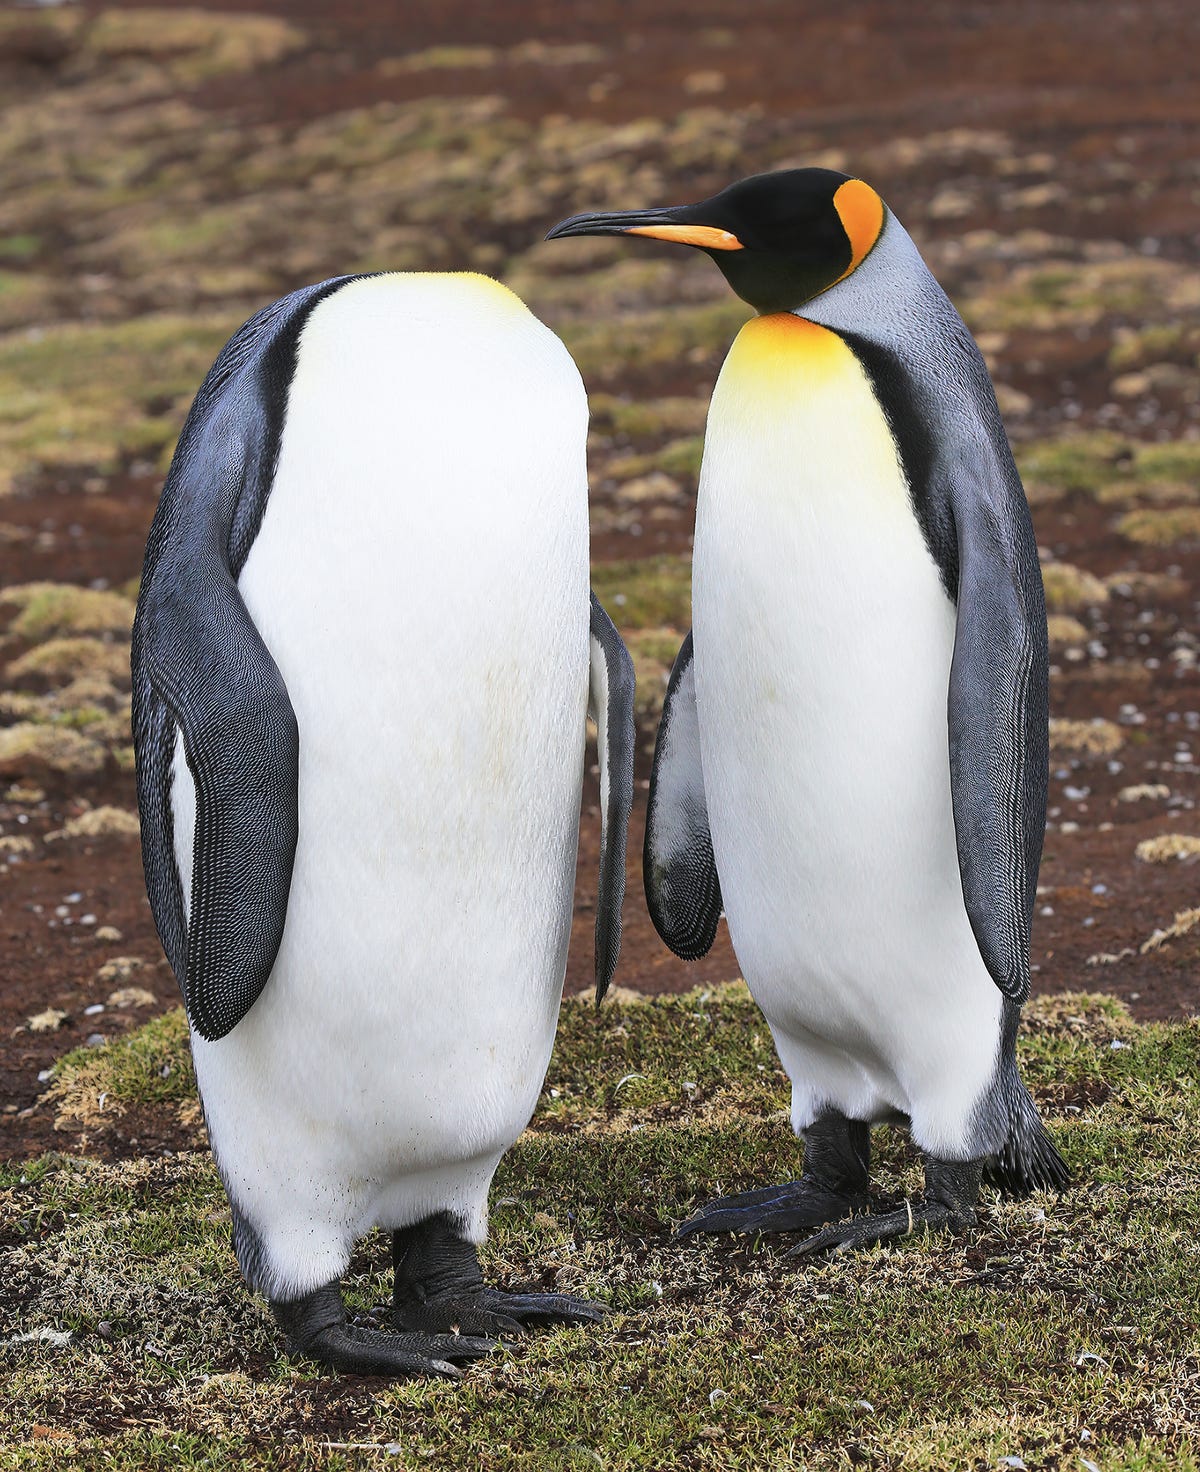 Two penguins stand together, but one has its head back so it looks headless.